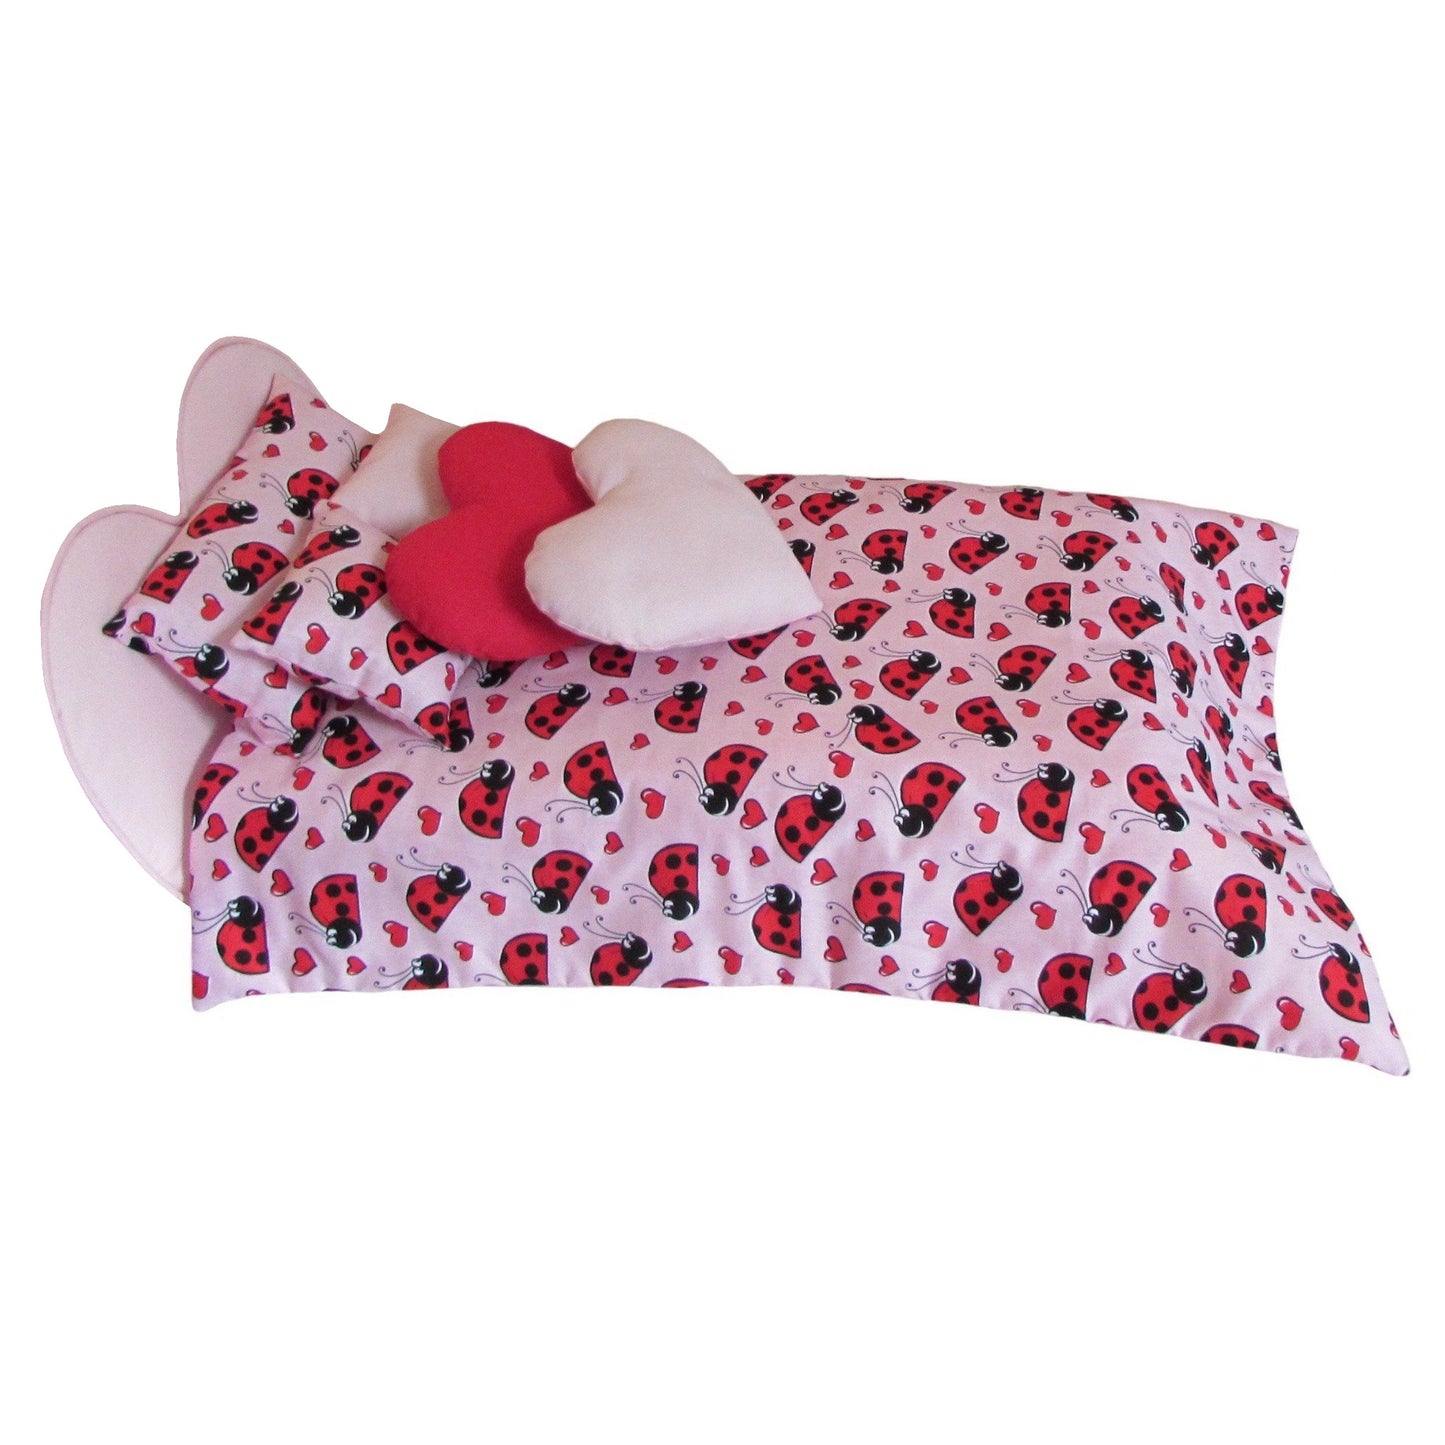 Pink Ladybug Hearts Doll Comforter Set and Pink Heart Upholstered Doll Bed for 18-inch dolls